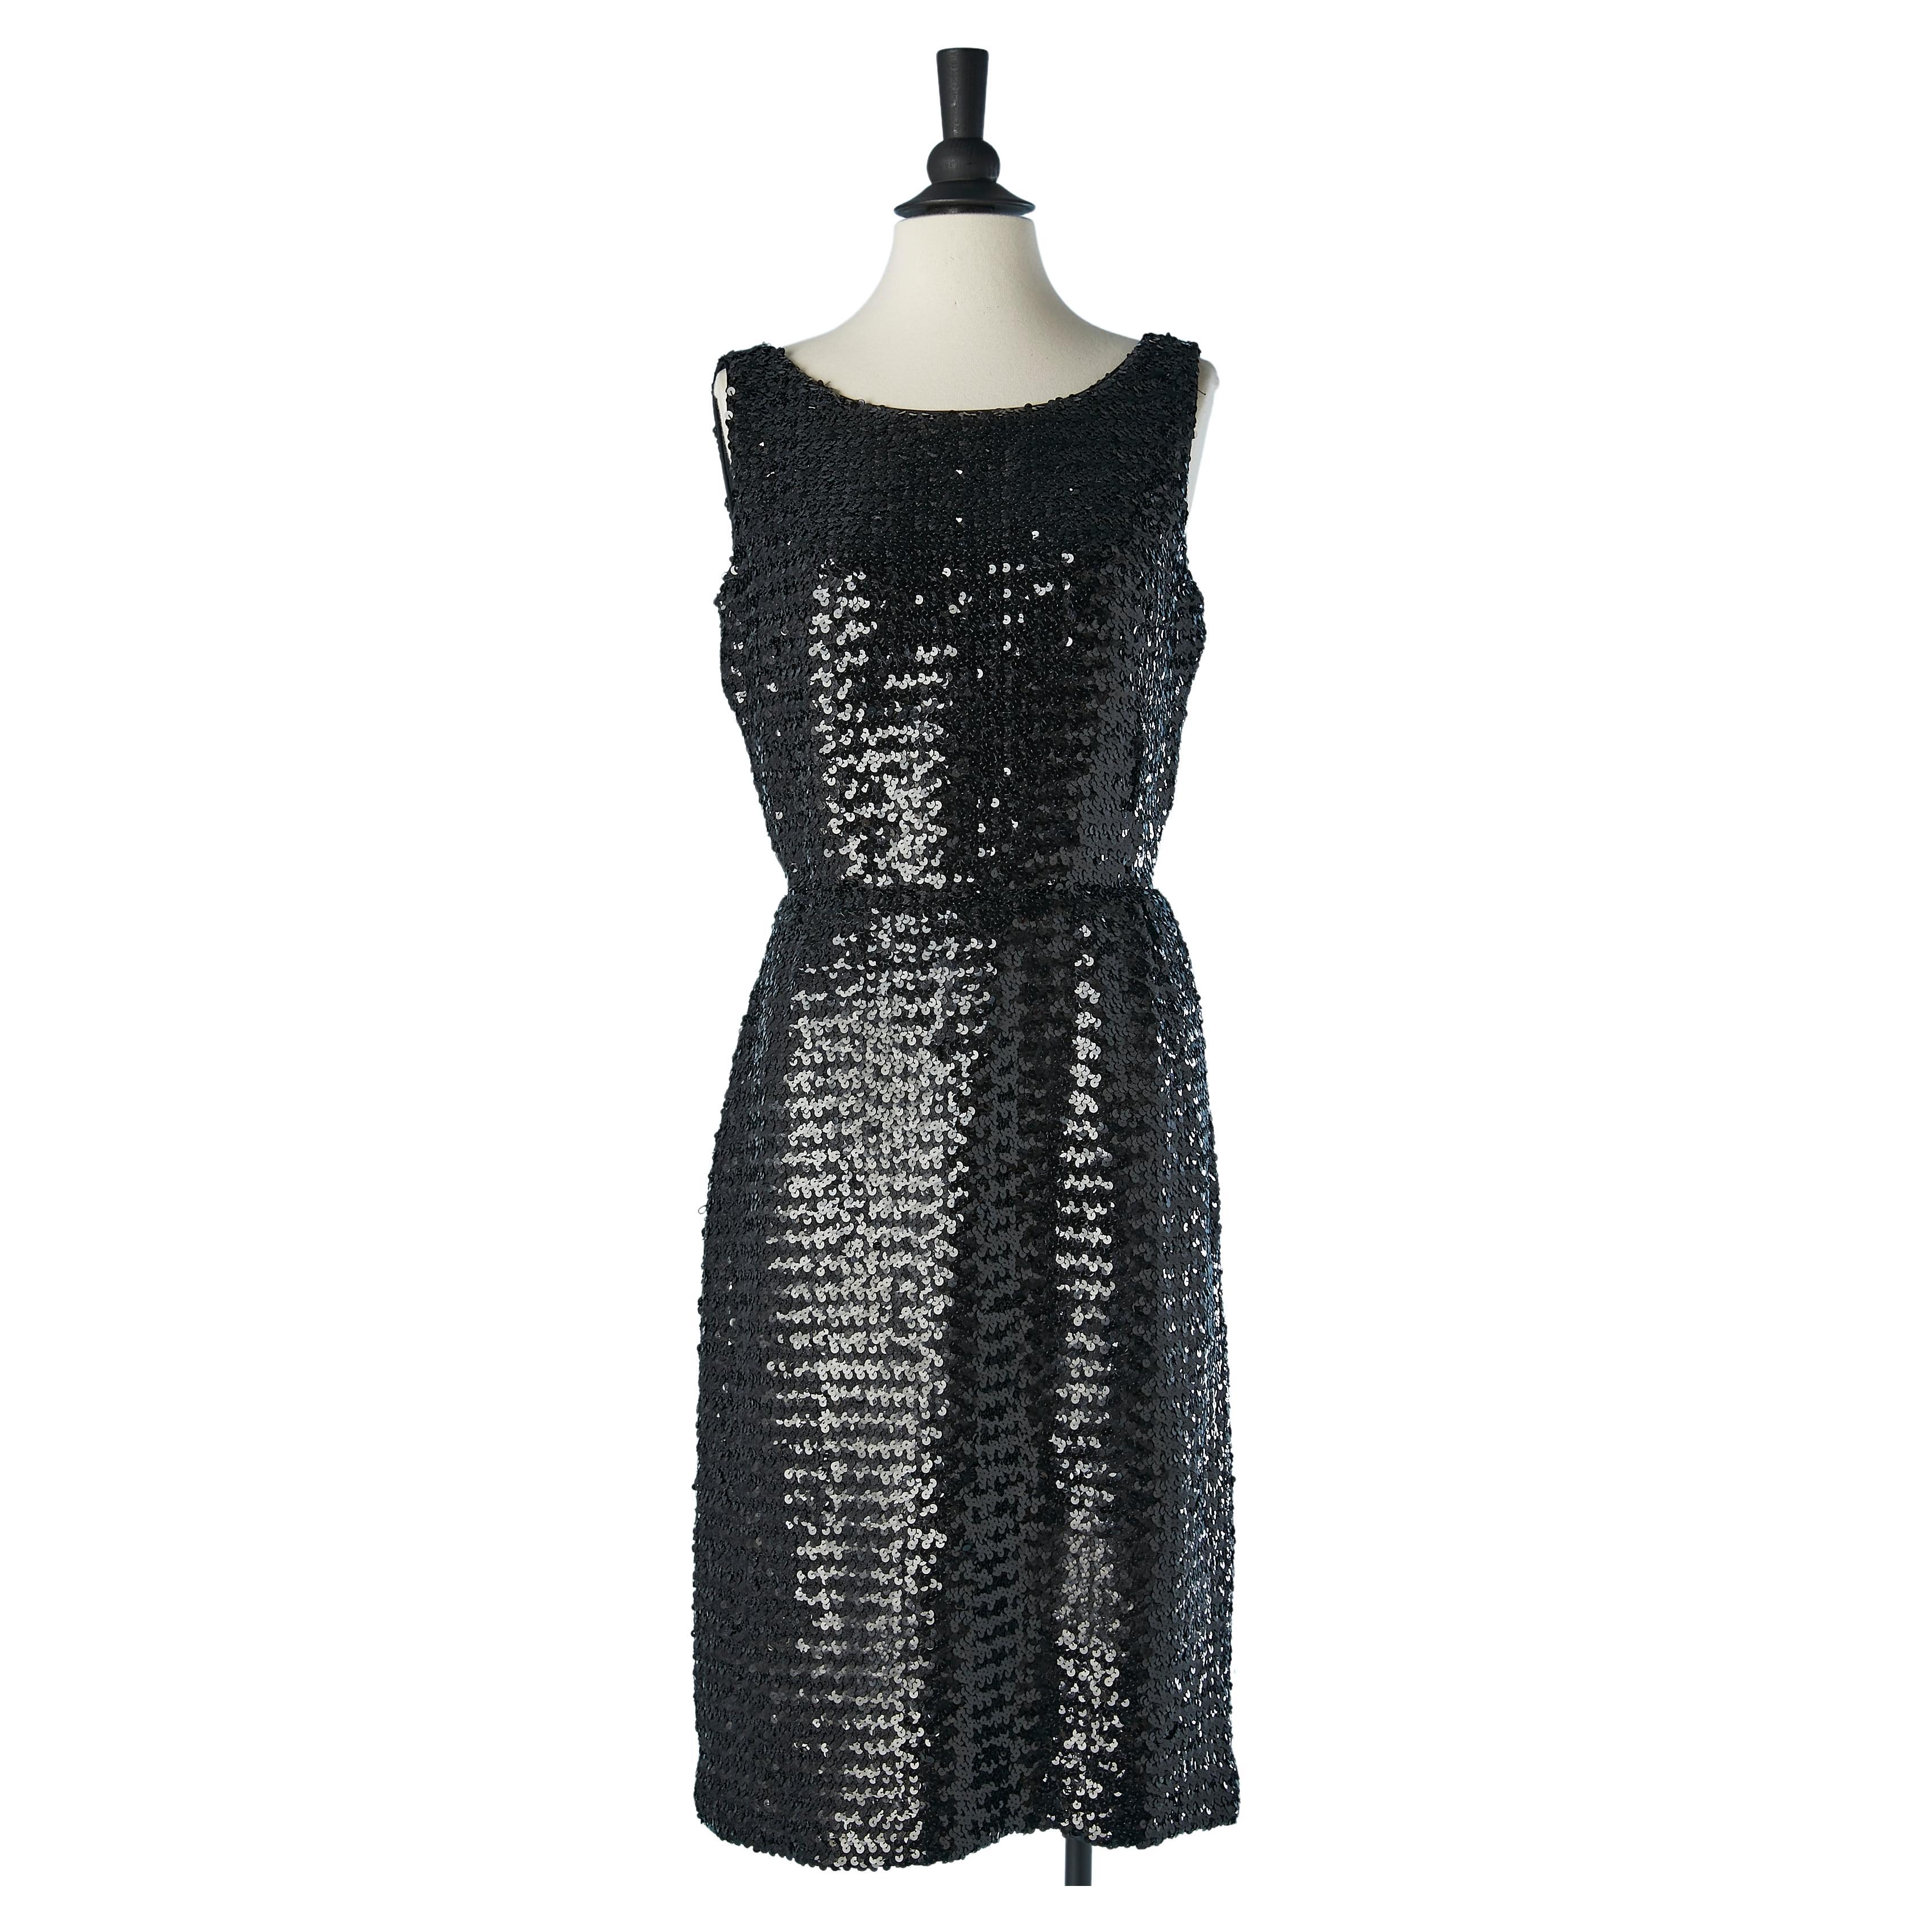 Black sleeveless sequin cocktail dress Suzy Perette  For Sale